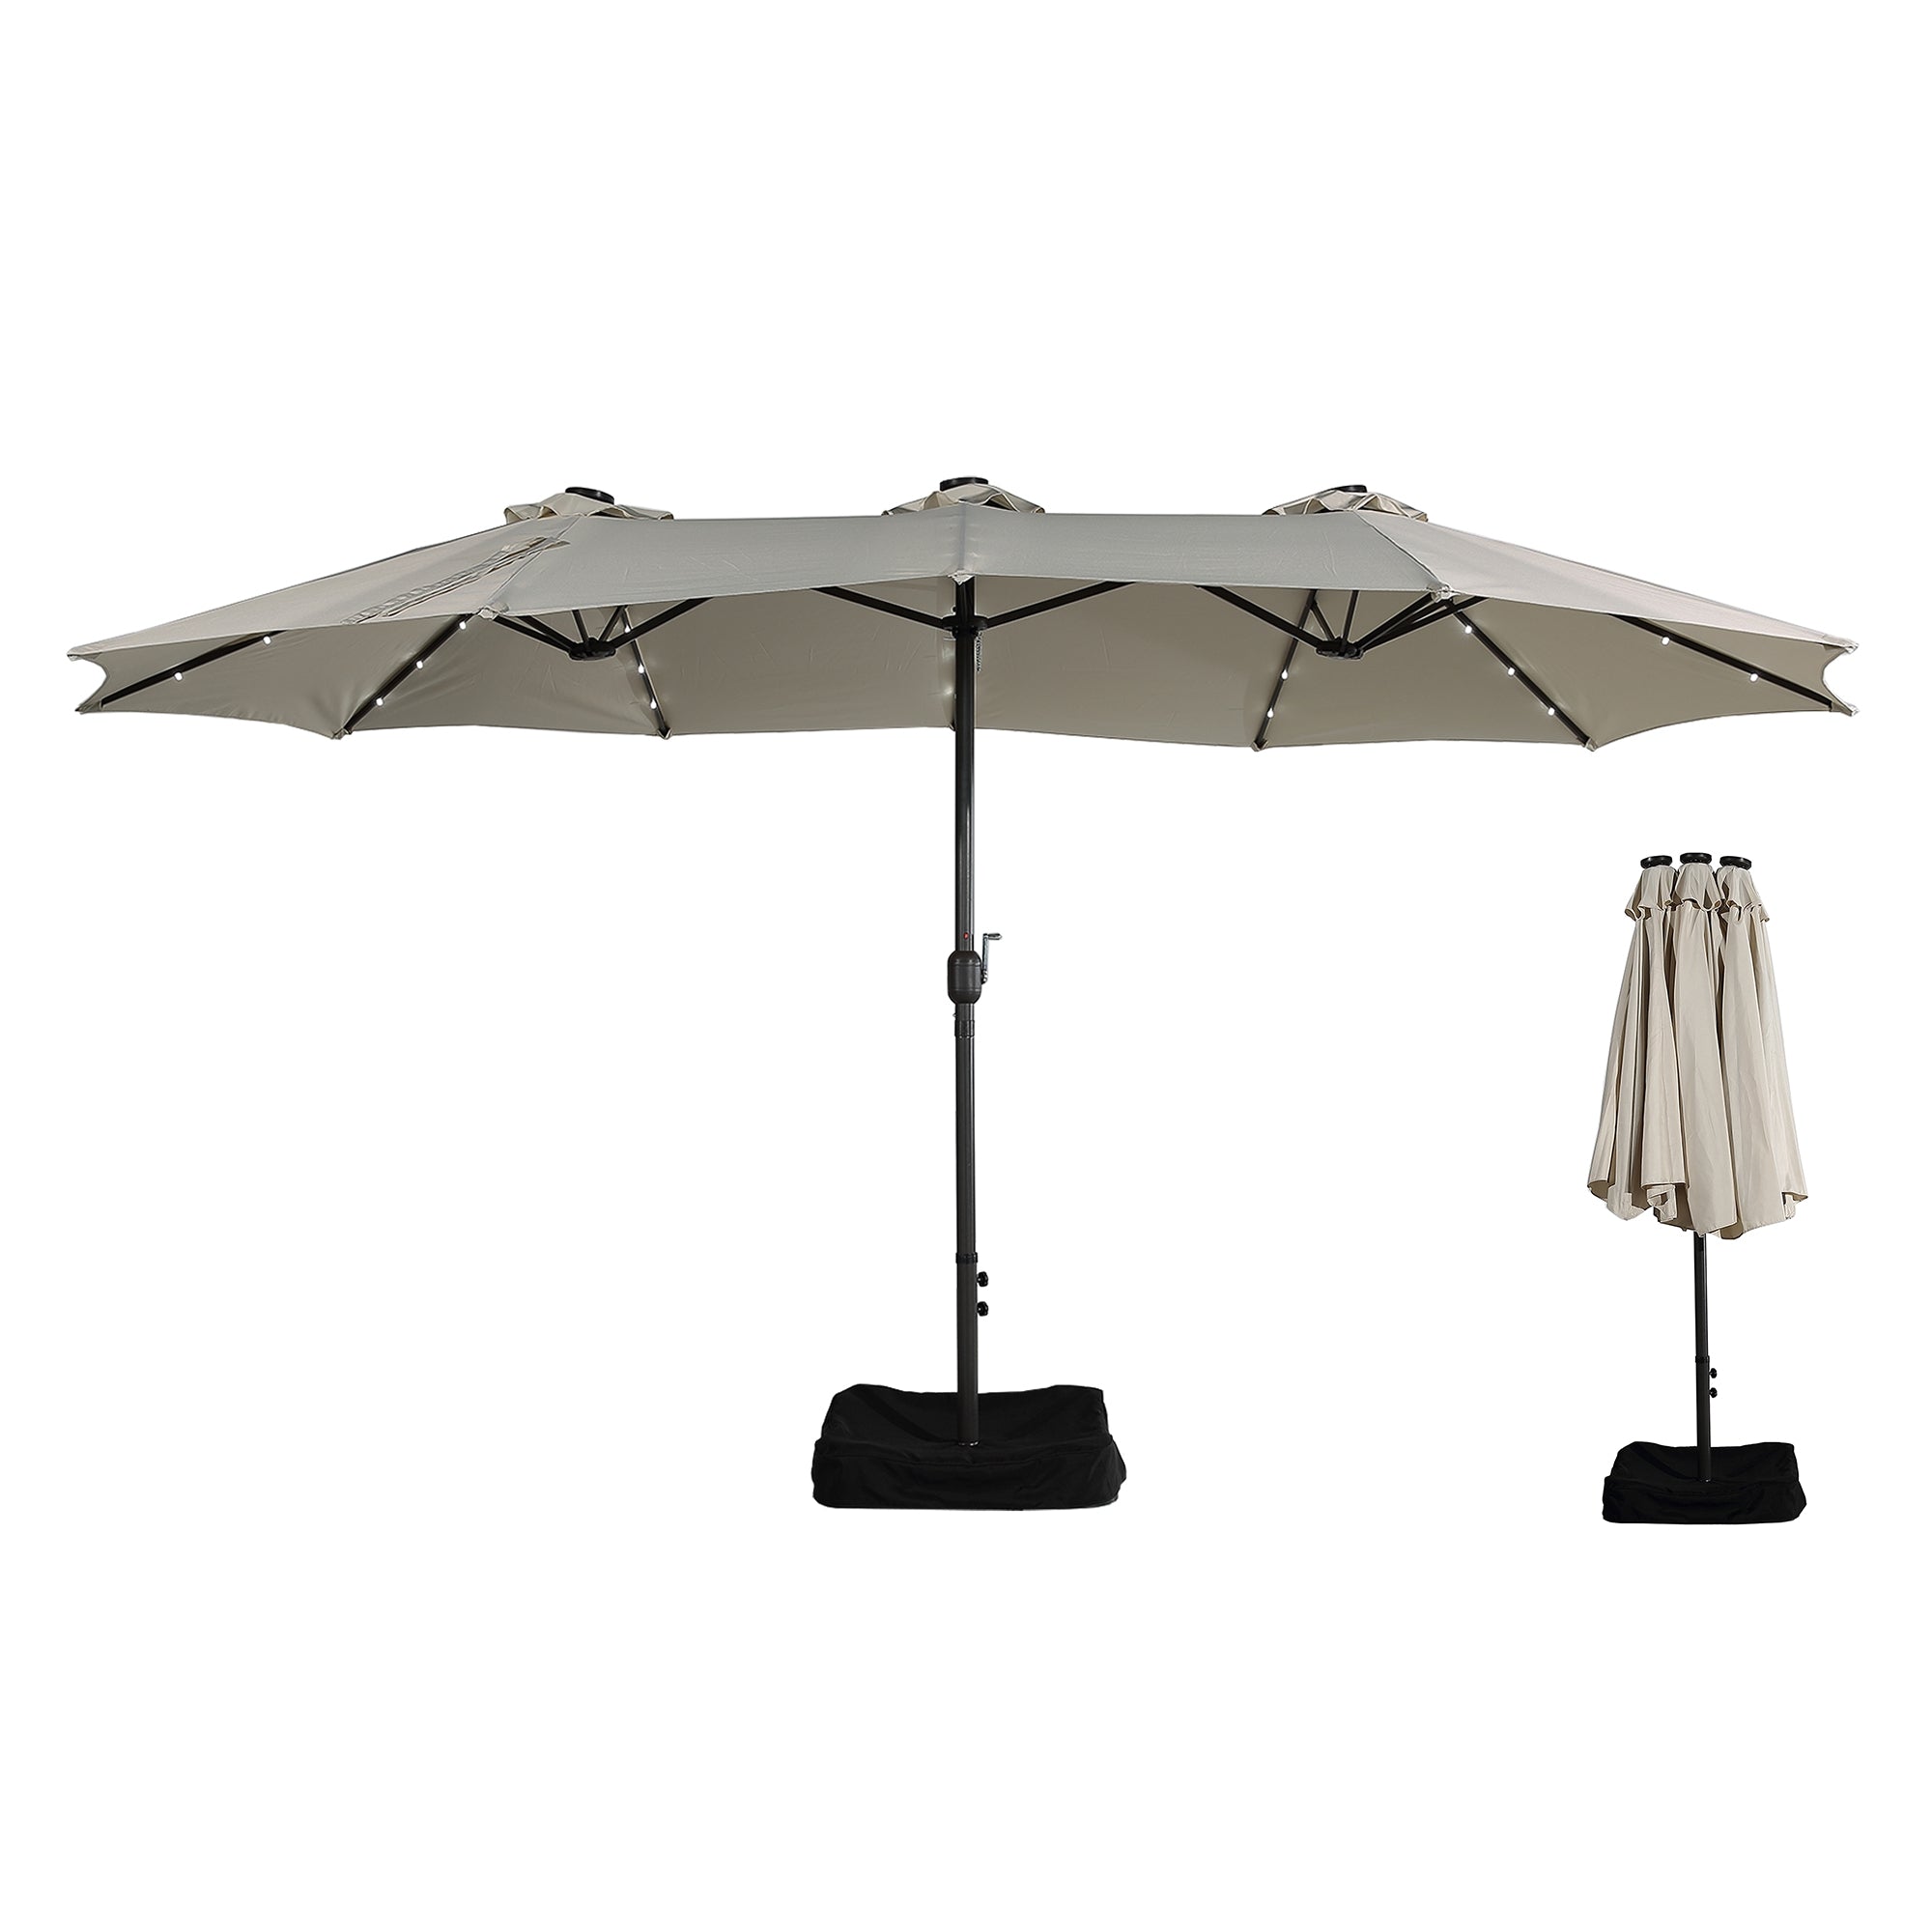 15ft Patio Market Umbrella with Base and Solar Light in Beige